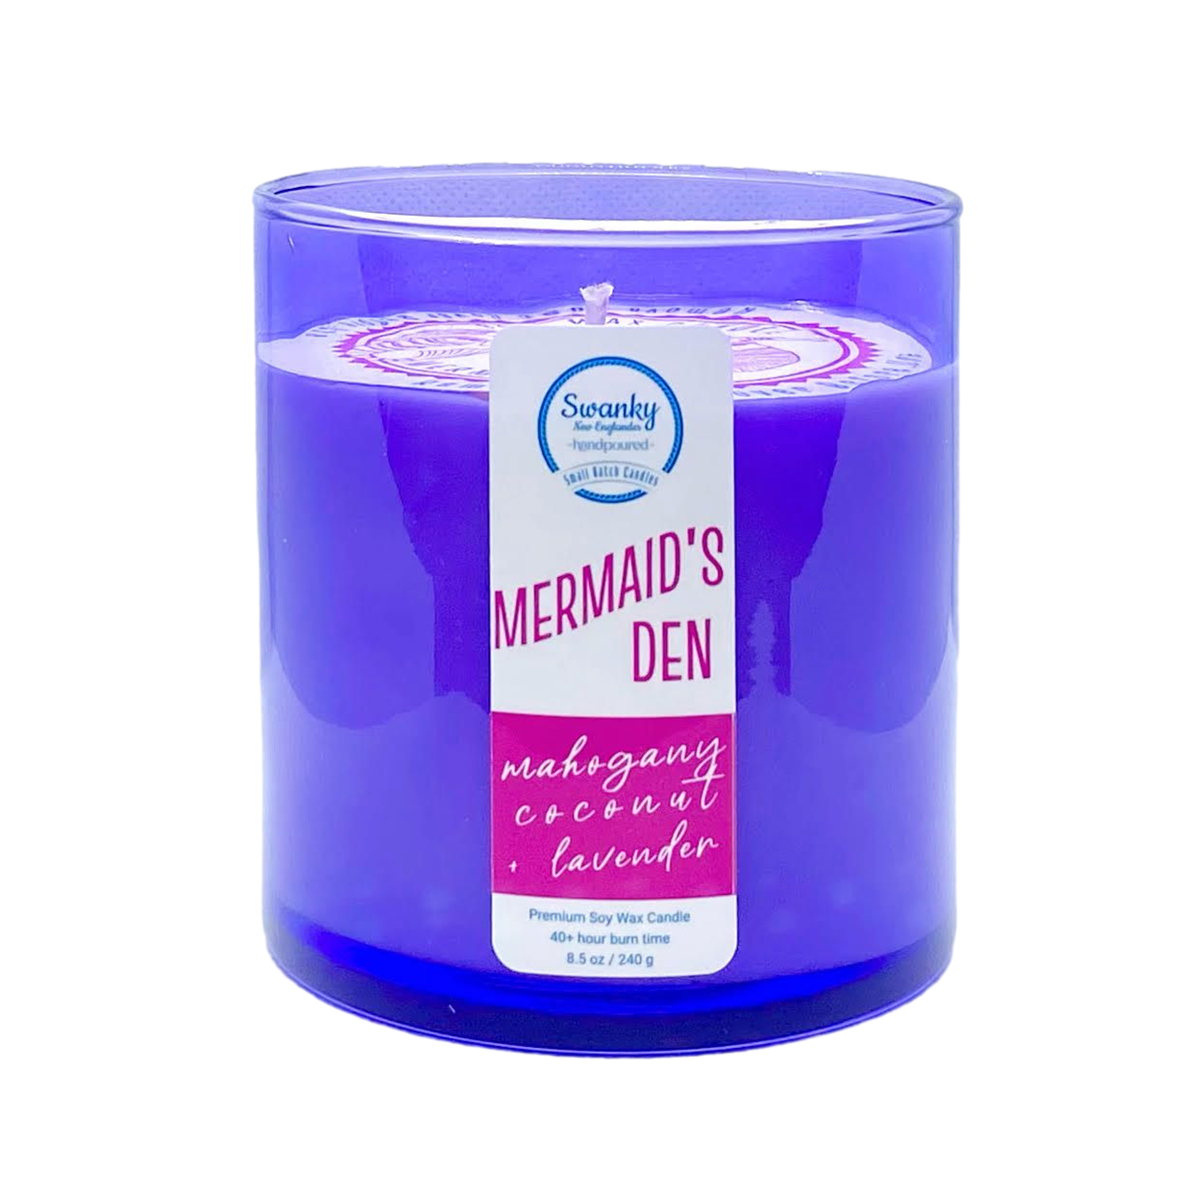 Mermaid's Den | Sea Glass Candle